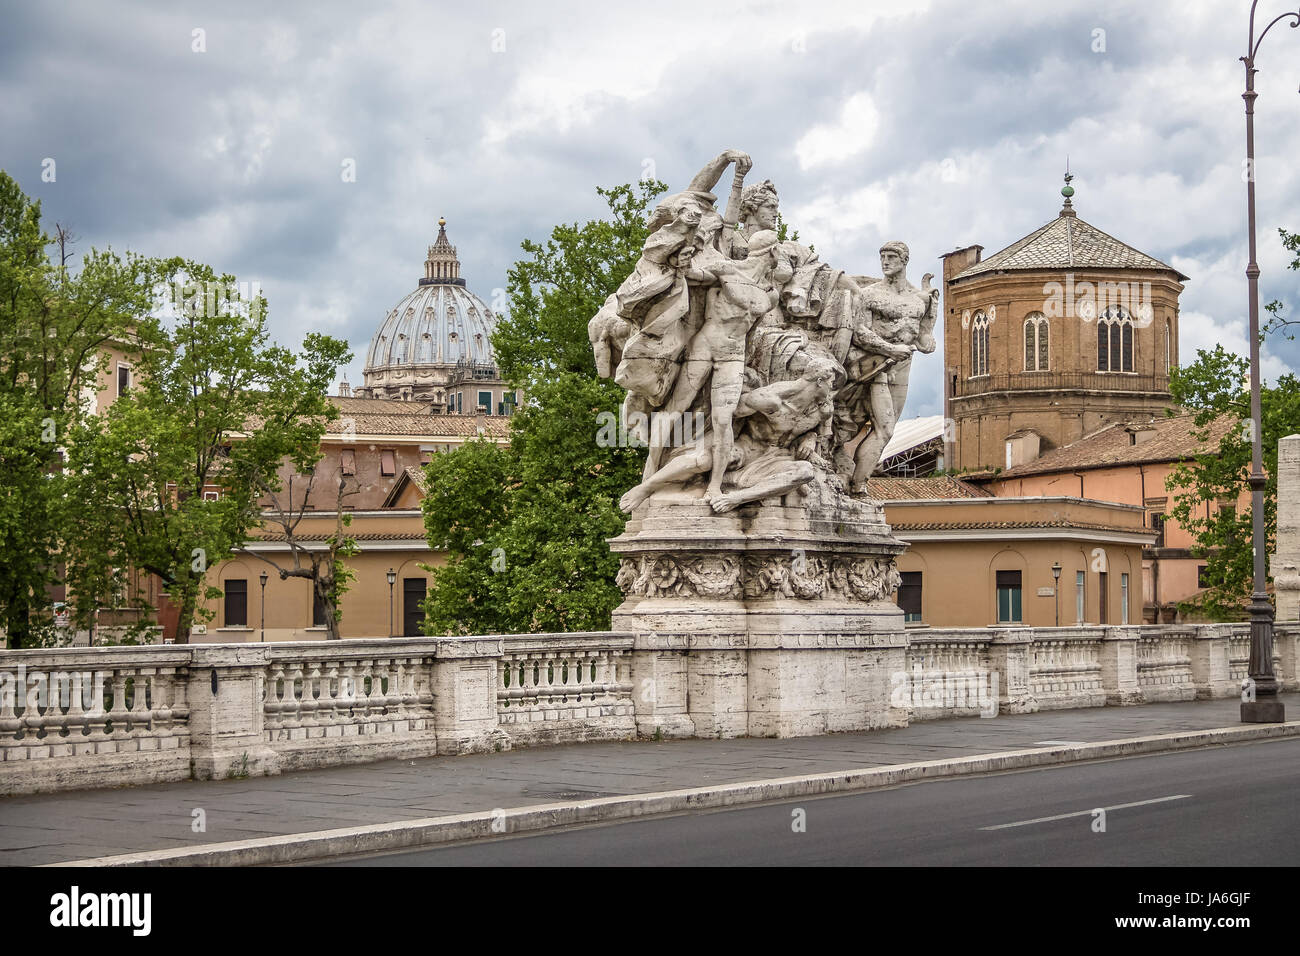 Famous Statue of the Ponte Vittorio Emanuele II and St. Peter's basilica dome  - Rome, Italy Stock Photo